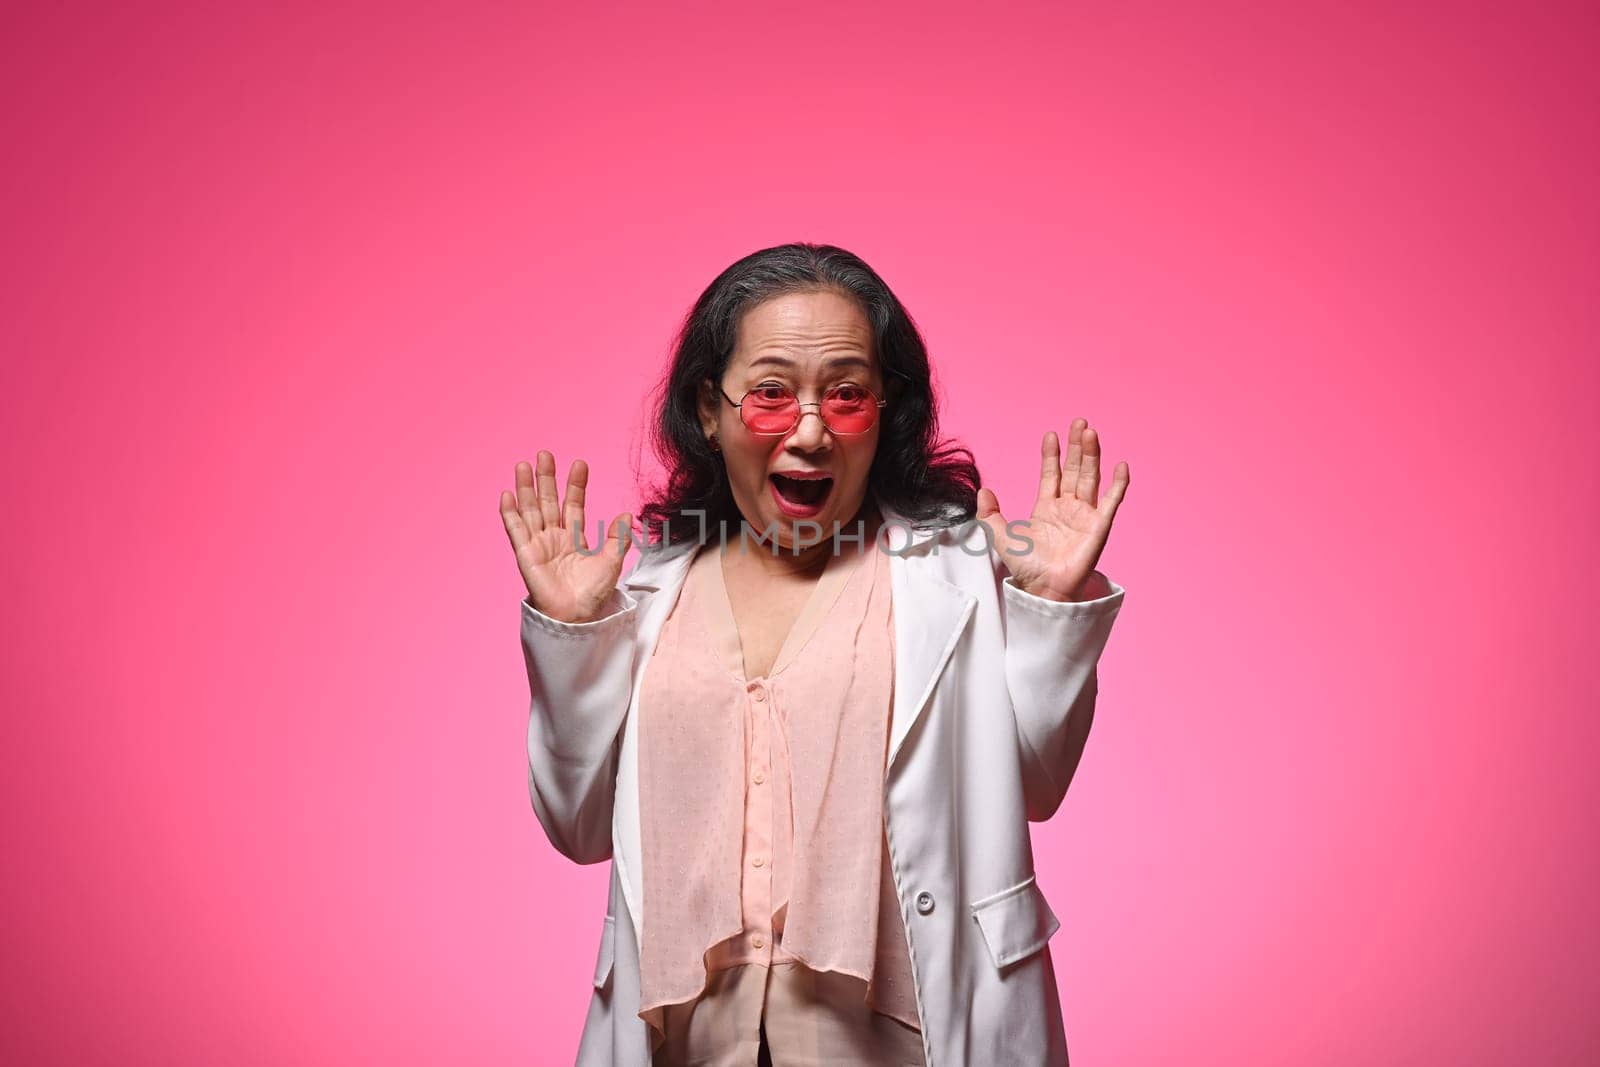 Stylish senior woman standing over pink background with surprise expression.